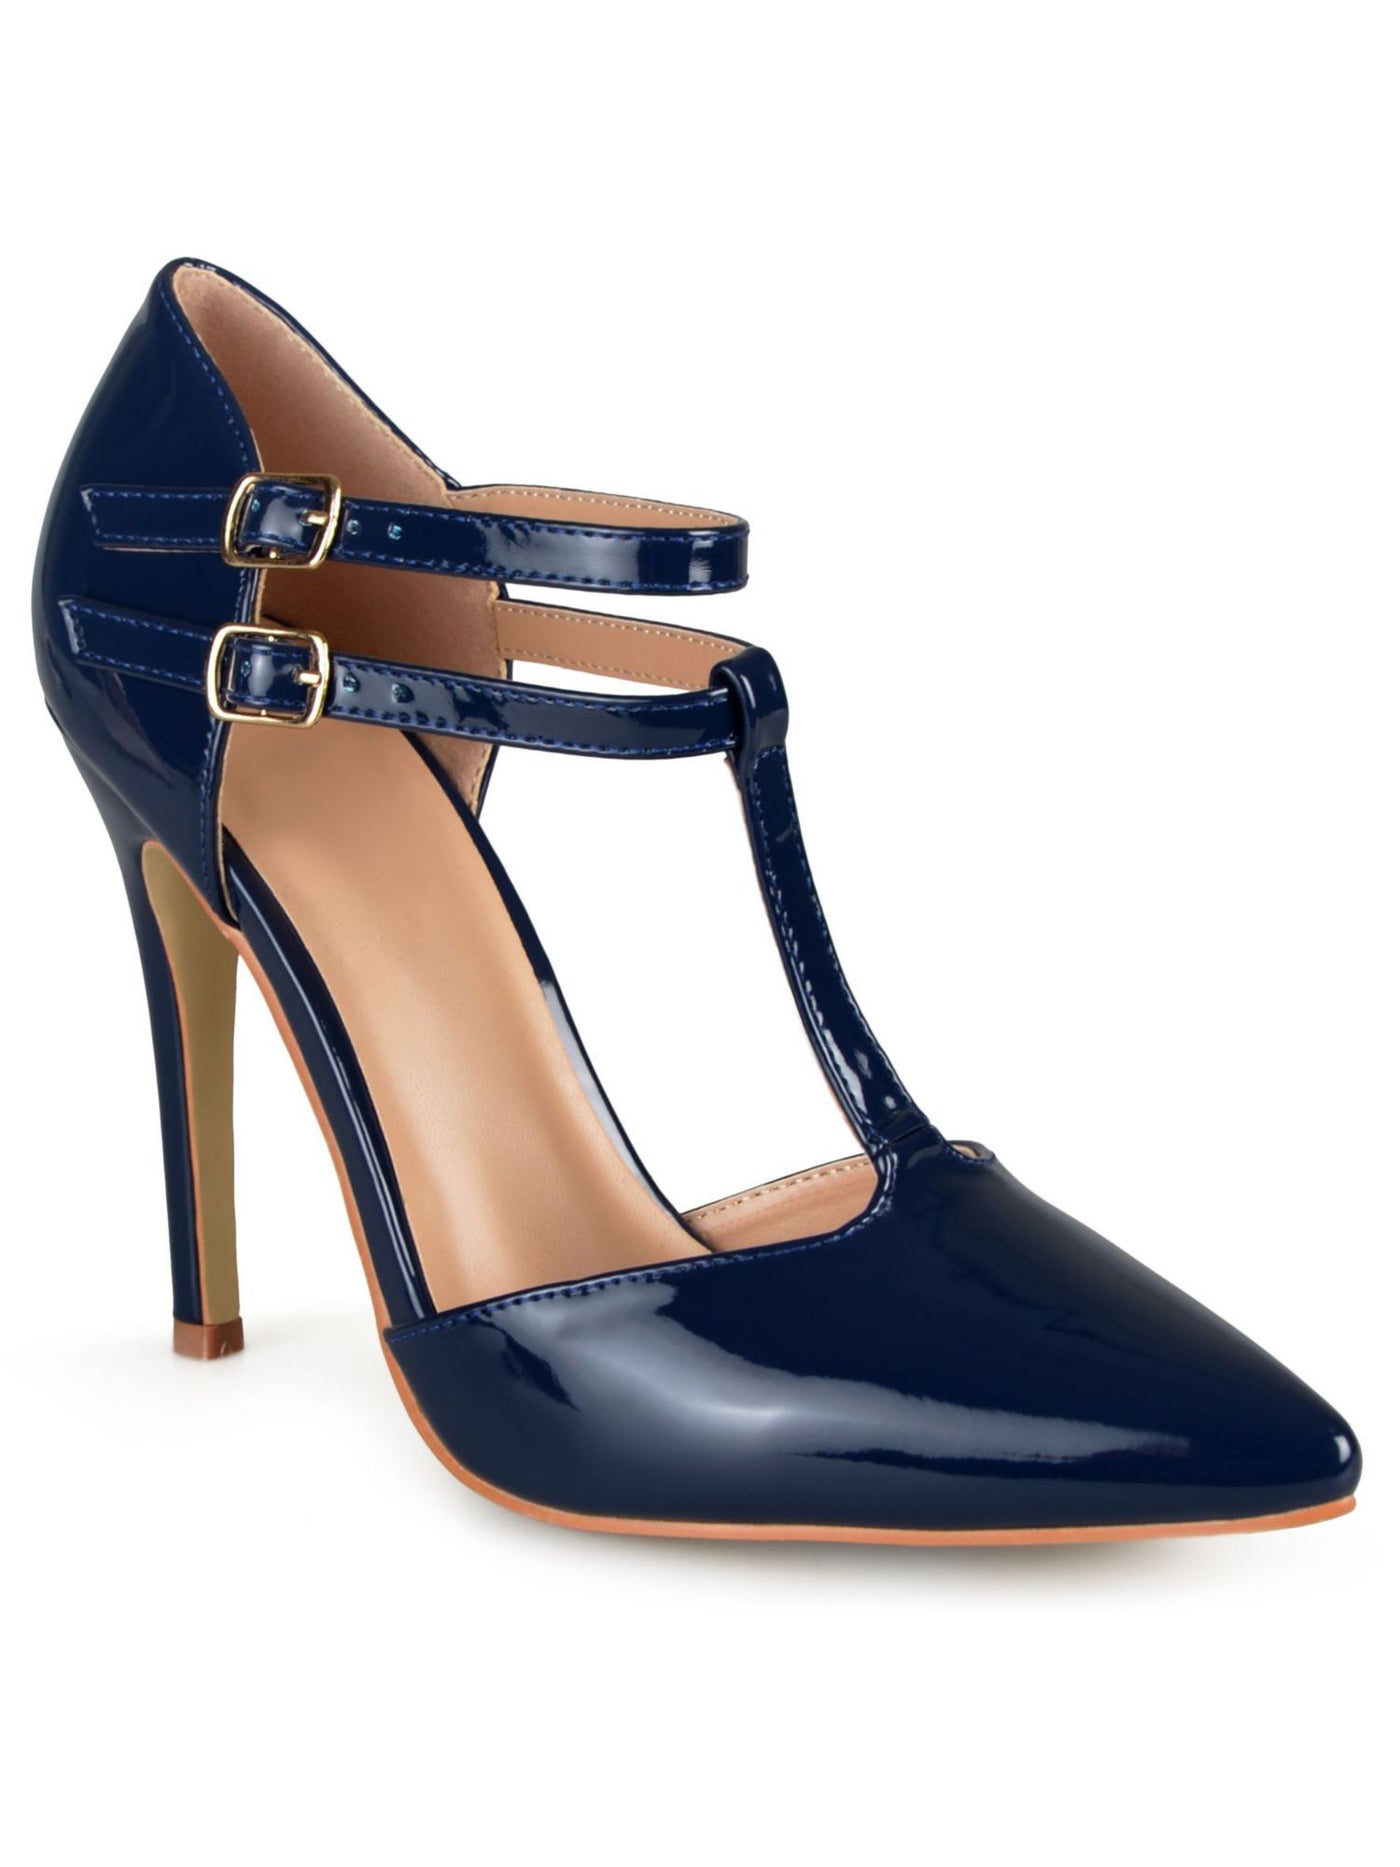 JOURNEE COLLECTION Womens Navy Padded T-Strap Adjustable Tru Pointed Toe Stiletto Buckle Dress Pumps Shoes 7.5 M